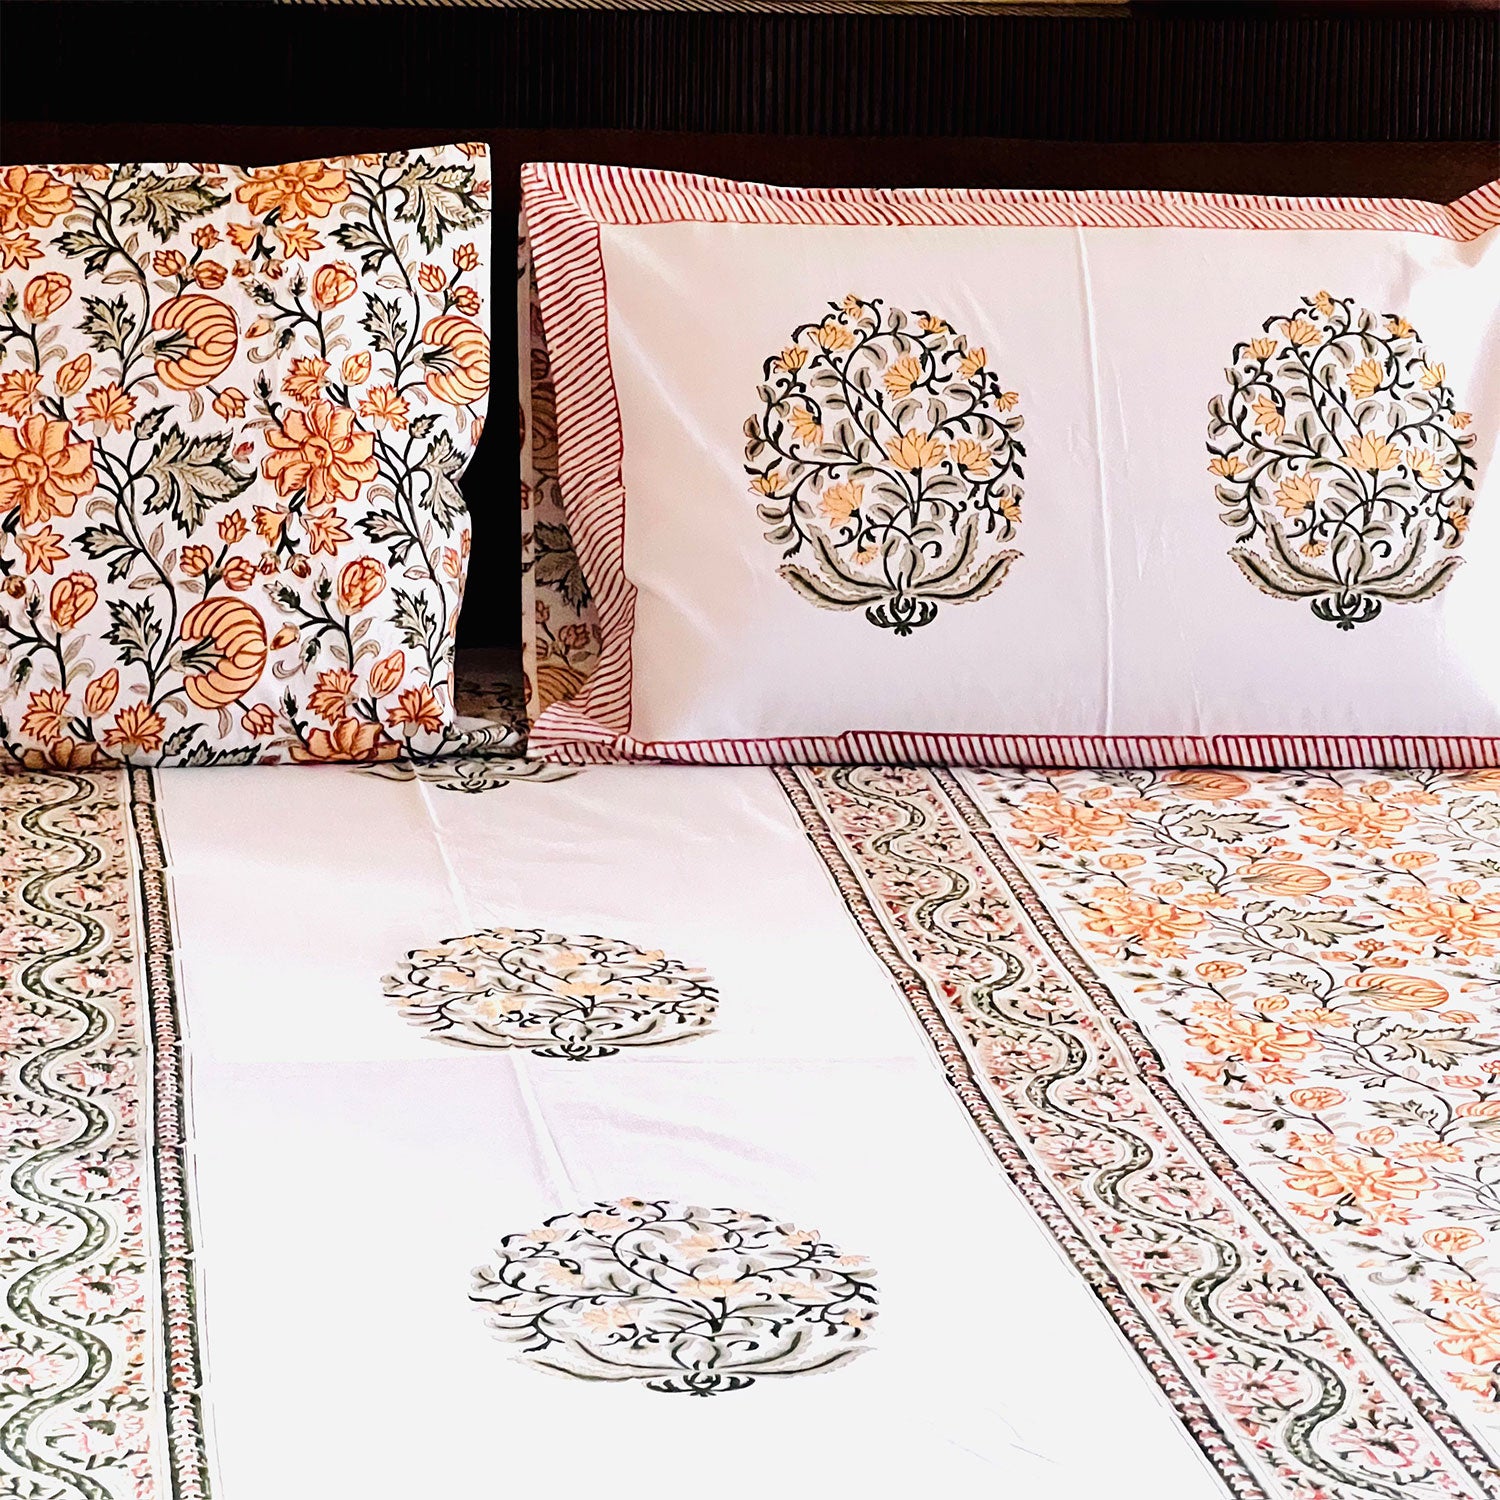 White Floral Block Printed 210 Thread Count Cotton Double Bedsheet Set With 2 Pillow Covers - 108 inches x 108 inches